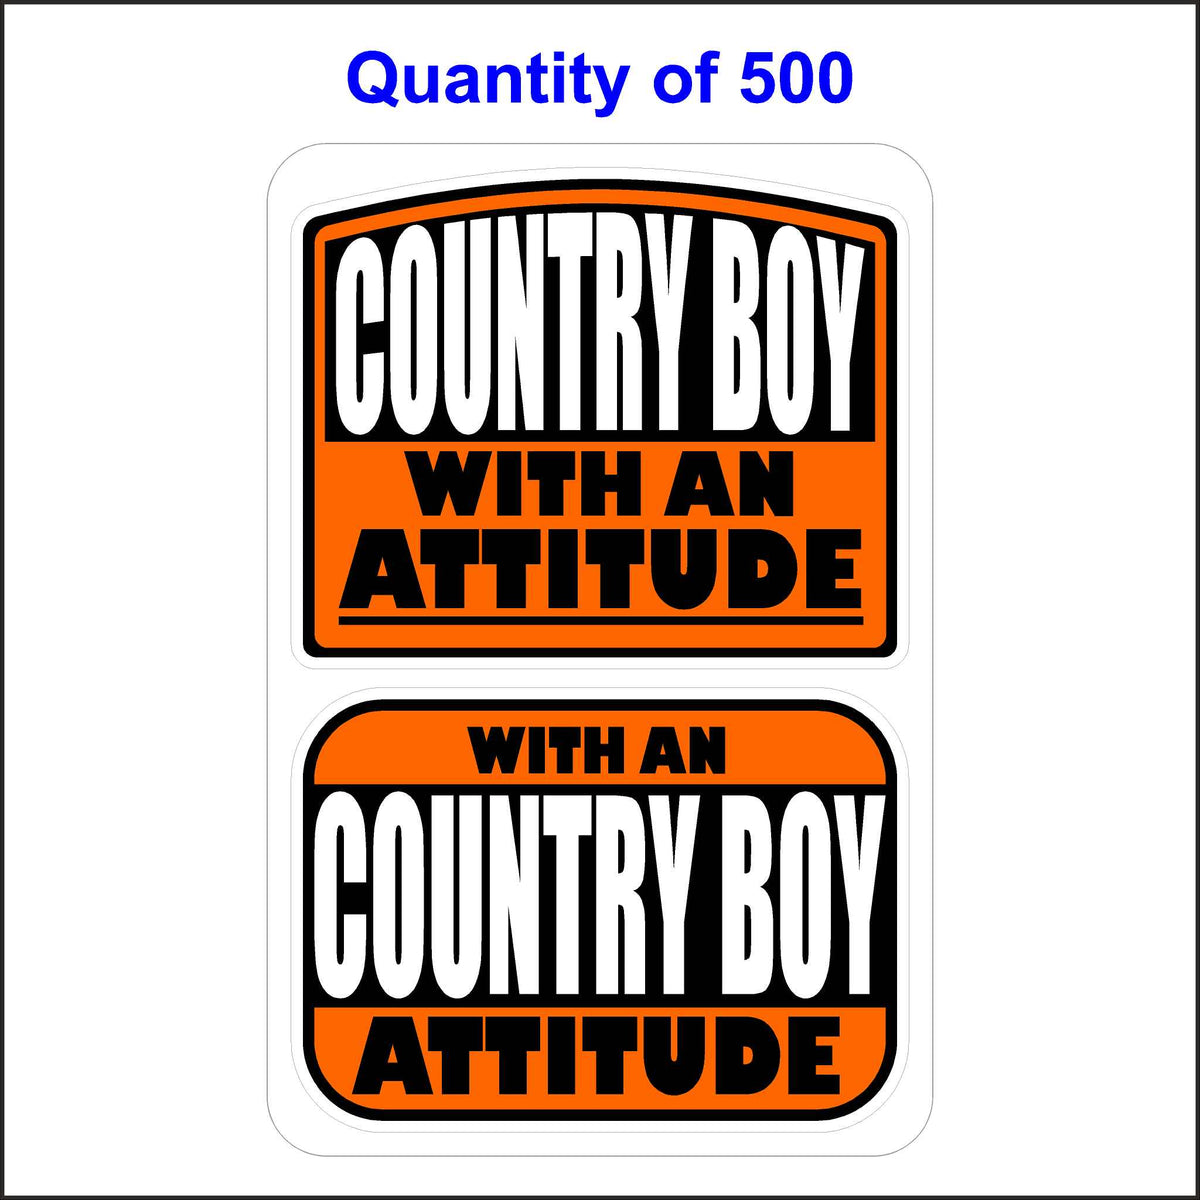 Country Boy with an Attitude Stickers 500 Quantity.